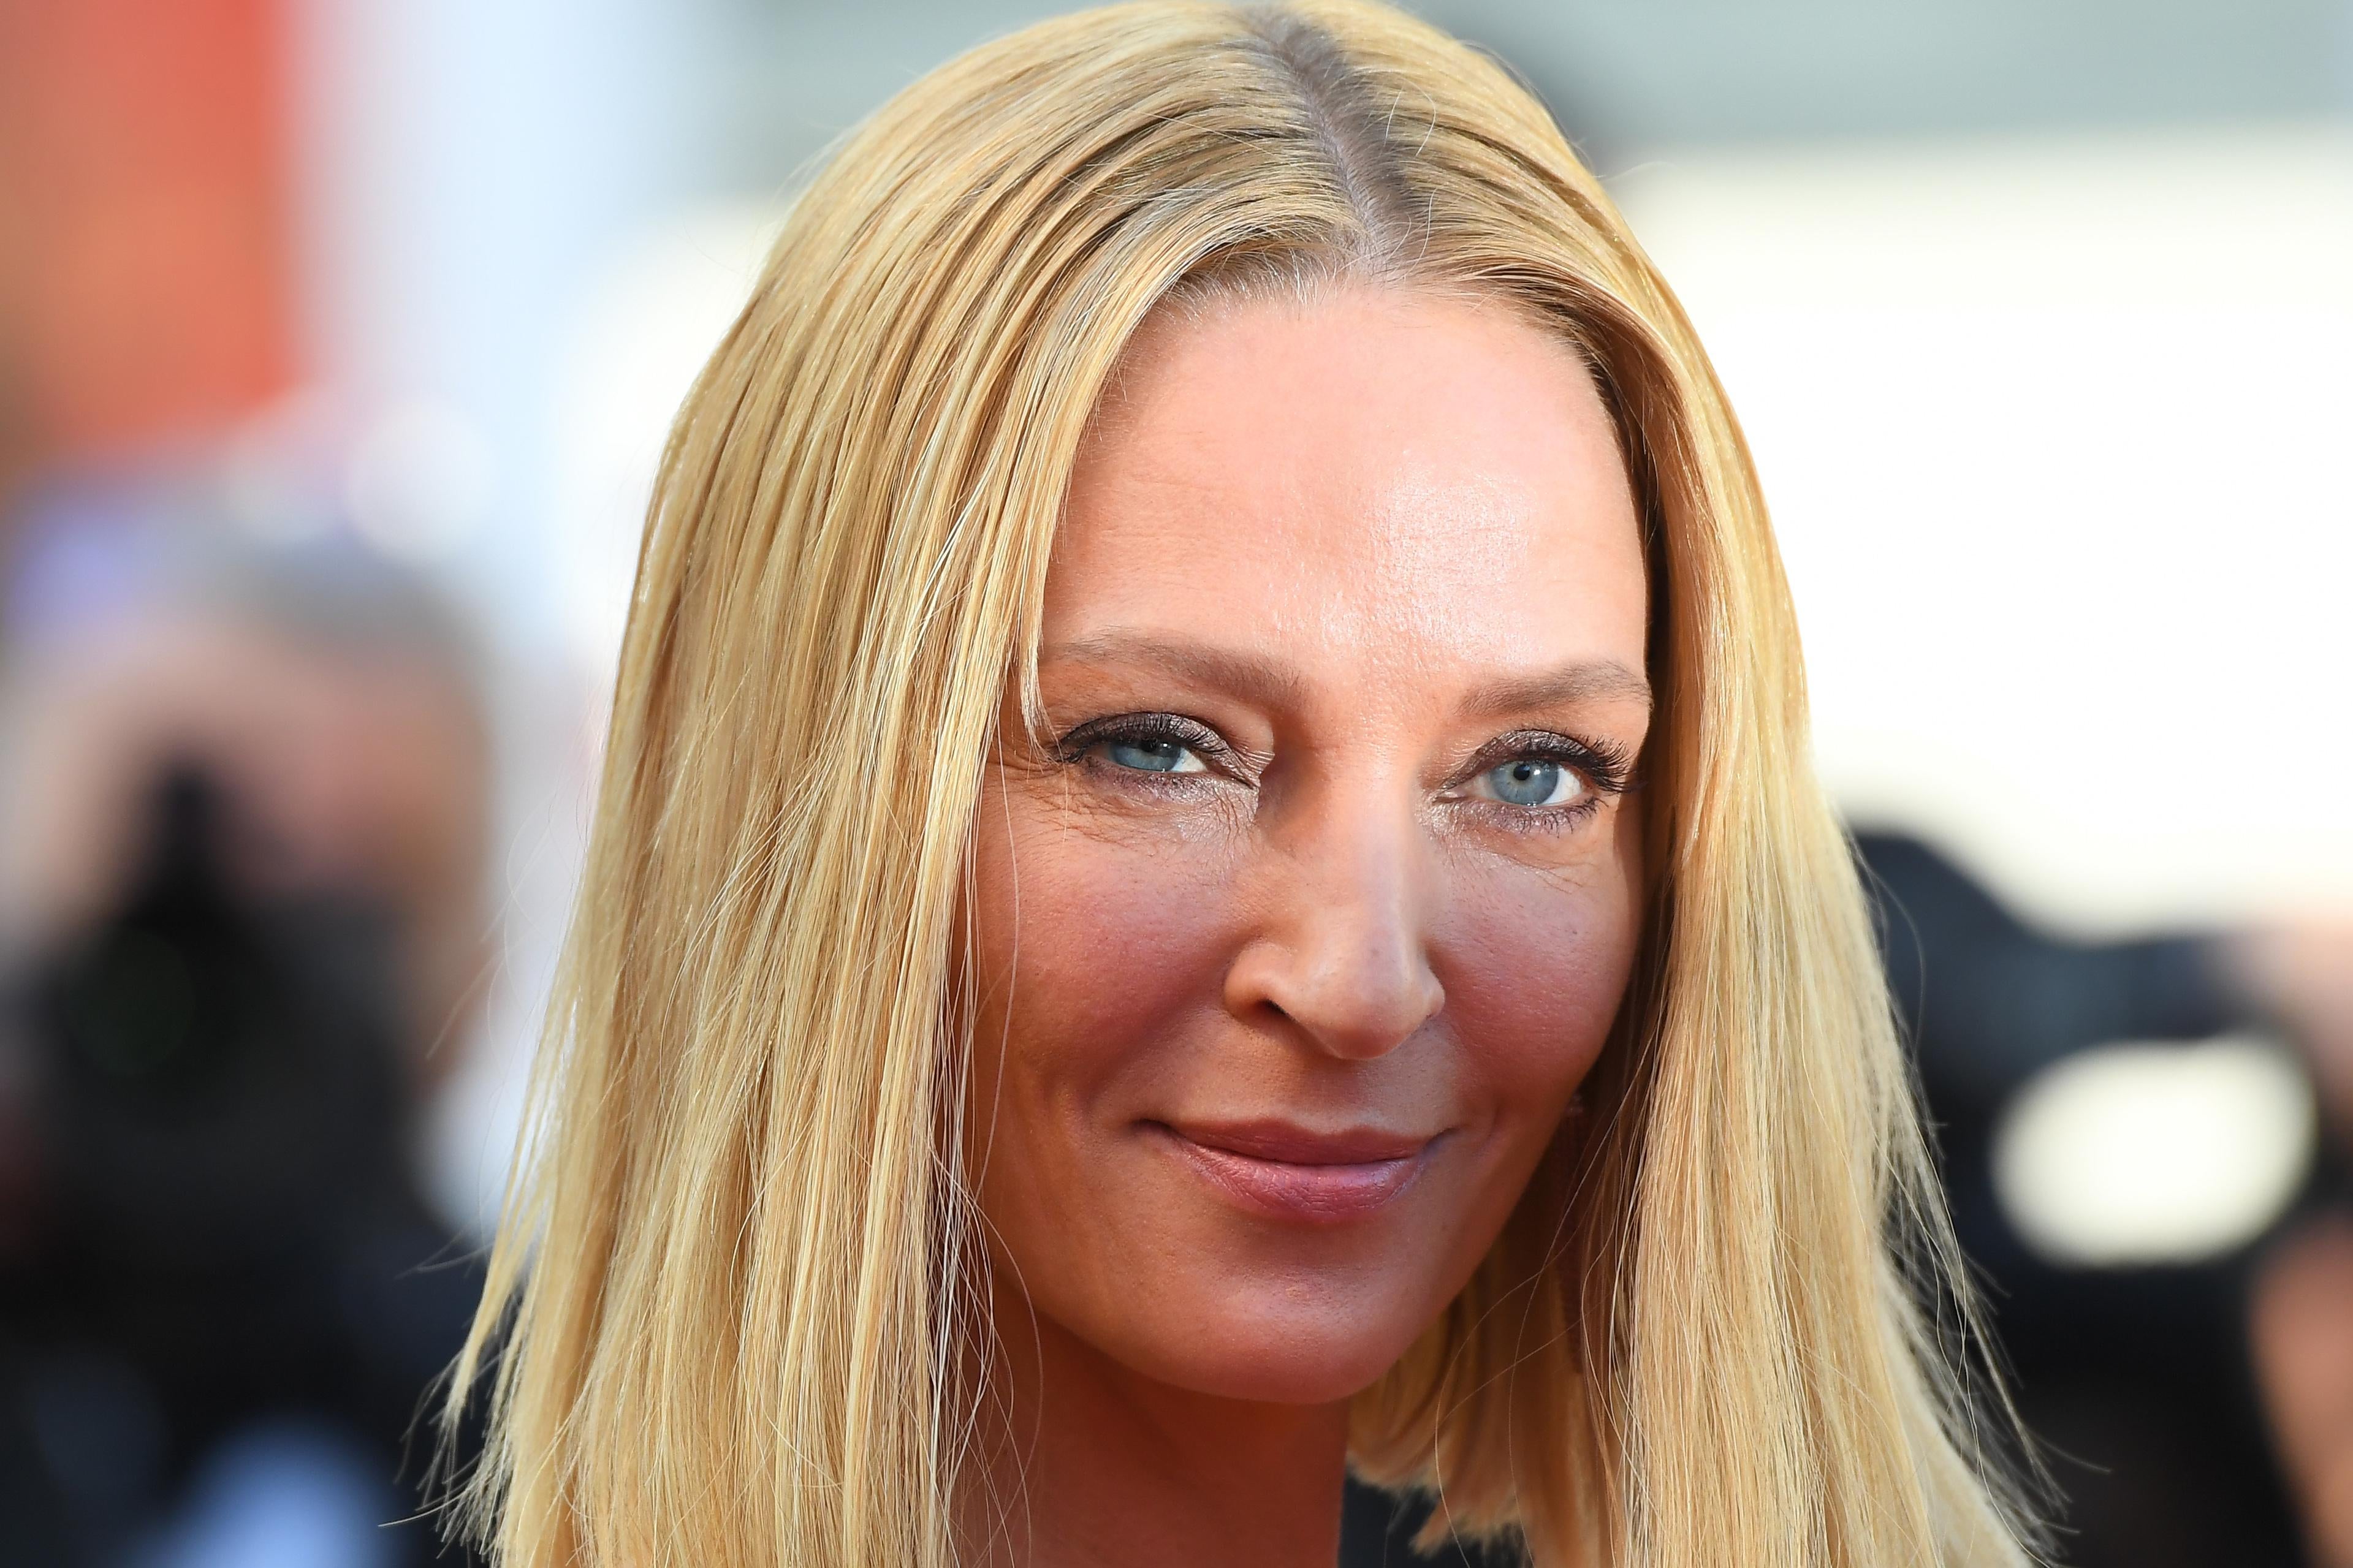 US actress and President of the Un Certain Regard jury Uma Thurman arrives on May 28, 2017 for the closing ceremony of the 70th edition of the Cannes Film Festival in Cannes, southern France.  / AFP PHOTO / Anne-Christine POUJOULAT        (Photo credit should read ANNE-CHRISTINE POUJOULAT/AFP/Getty Images)